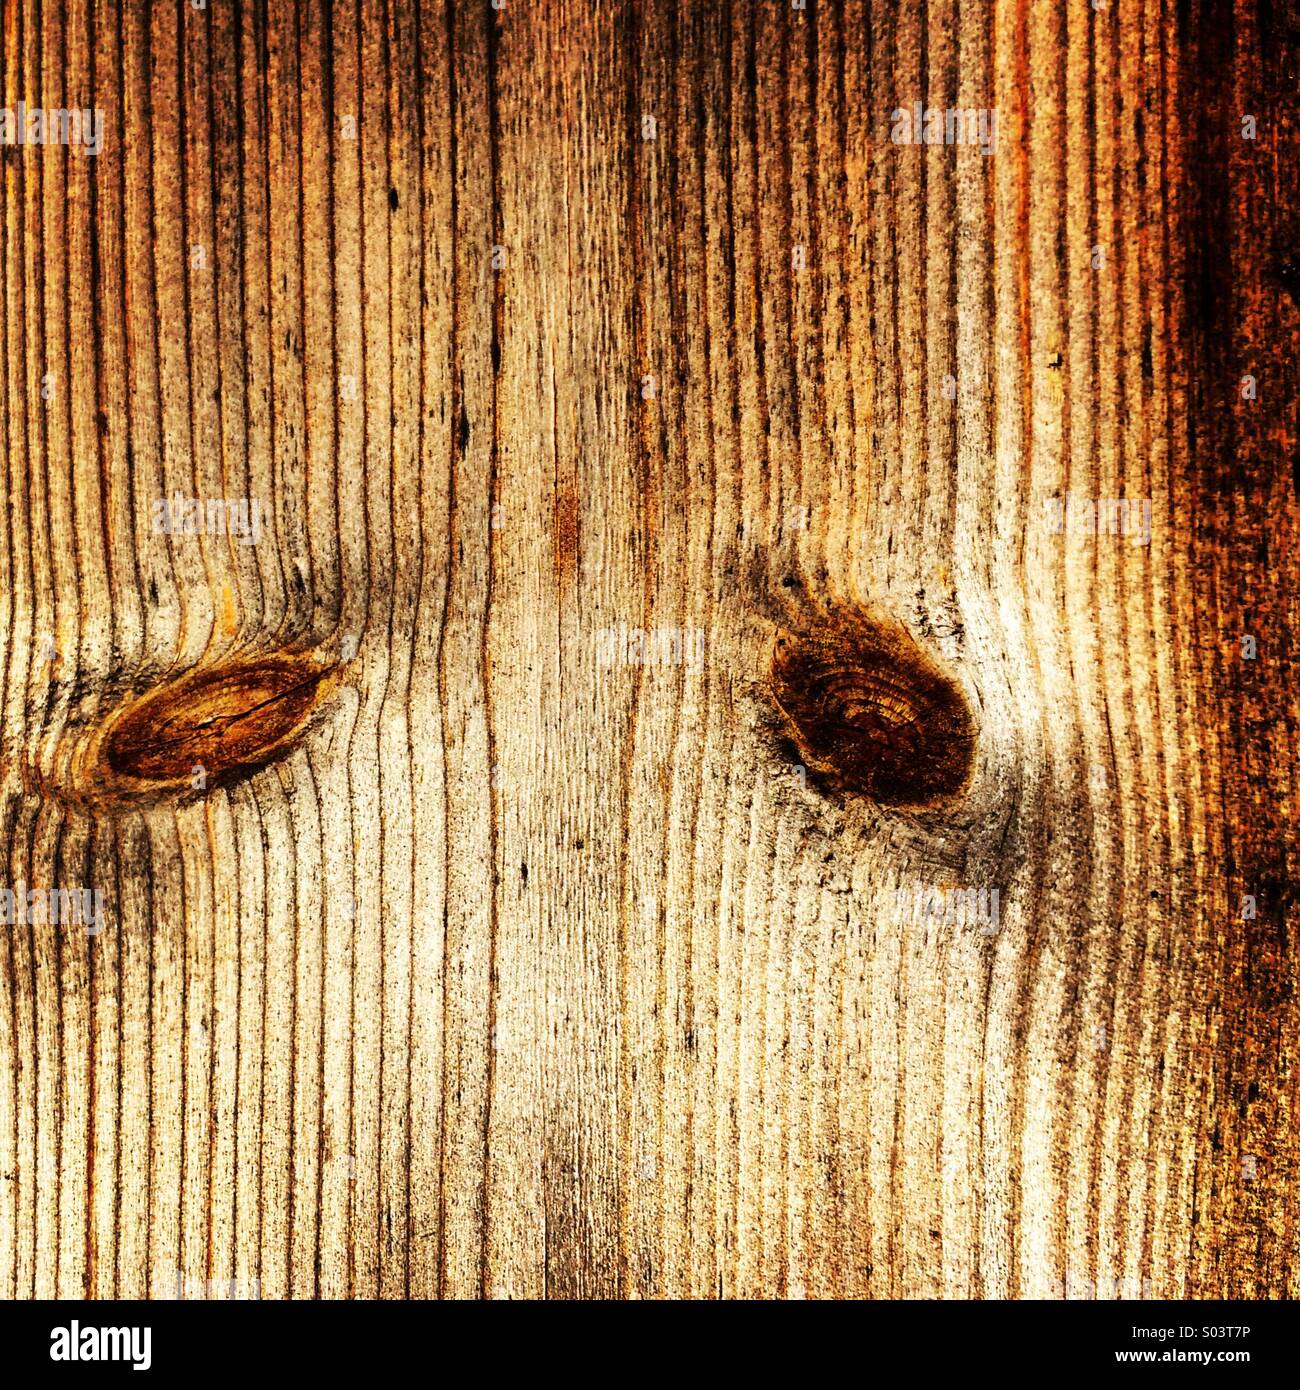 Close-up of wooden fence panel. Stock Photo